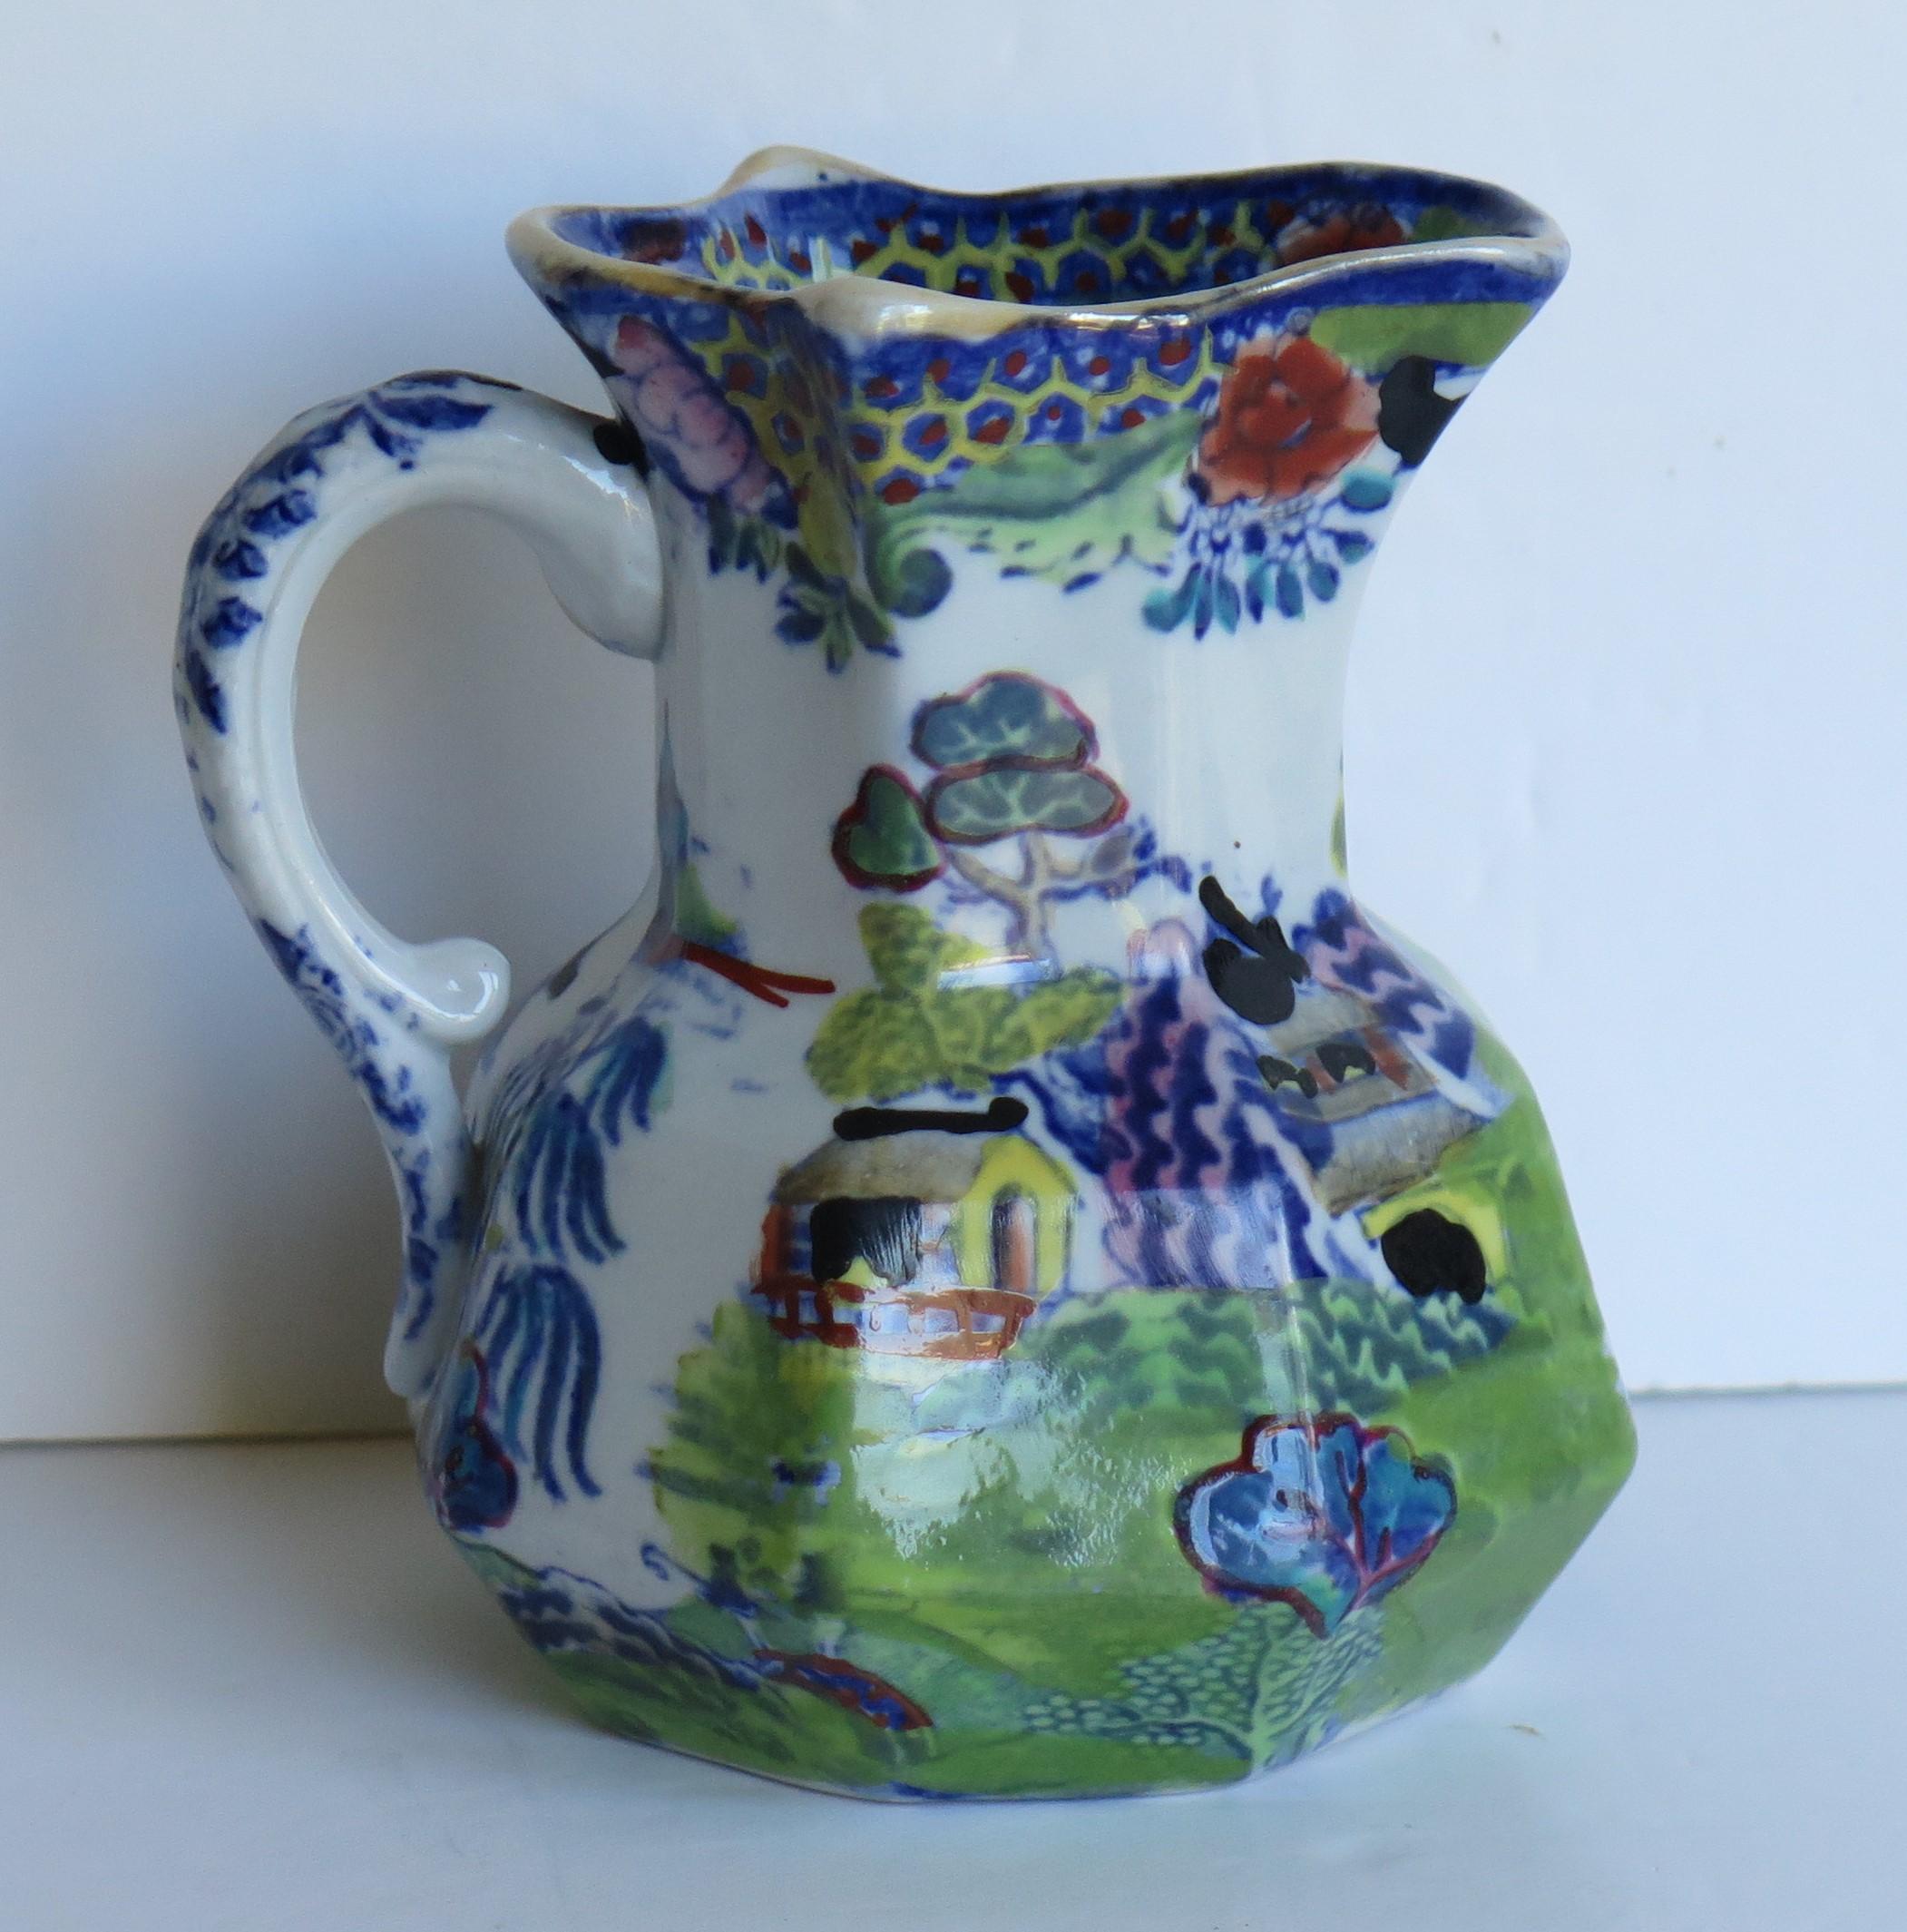 This is a good, Mason's Ironstone Hydra jug or pitcher in the Turner Willow, colored Blue and White pattern, made in the English,  first half of the 19th C period, circa 1830.

The jug has an octagonal shape with a notched snake handle and is